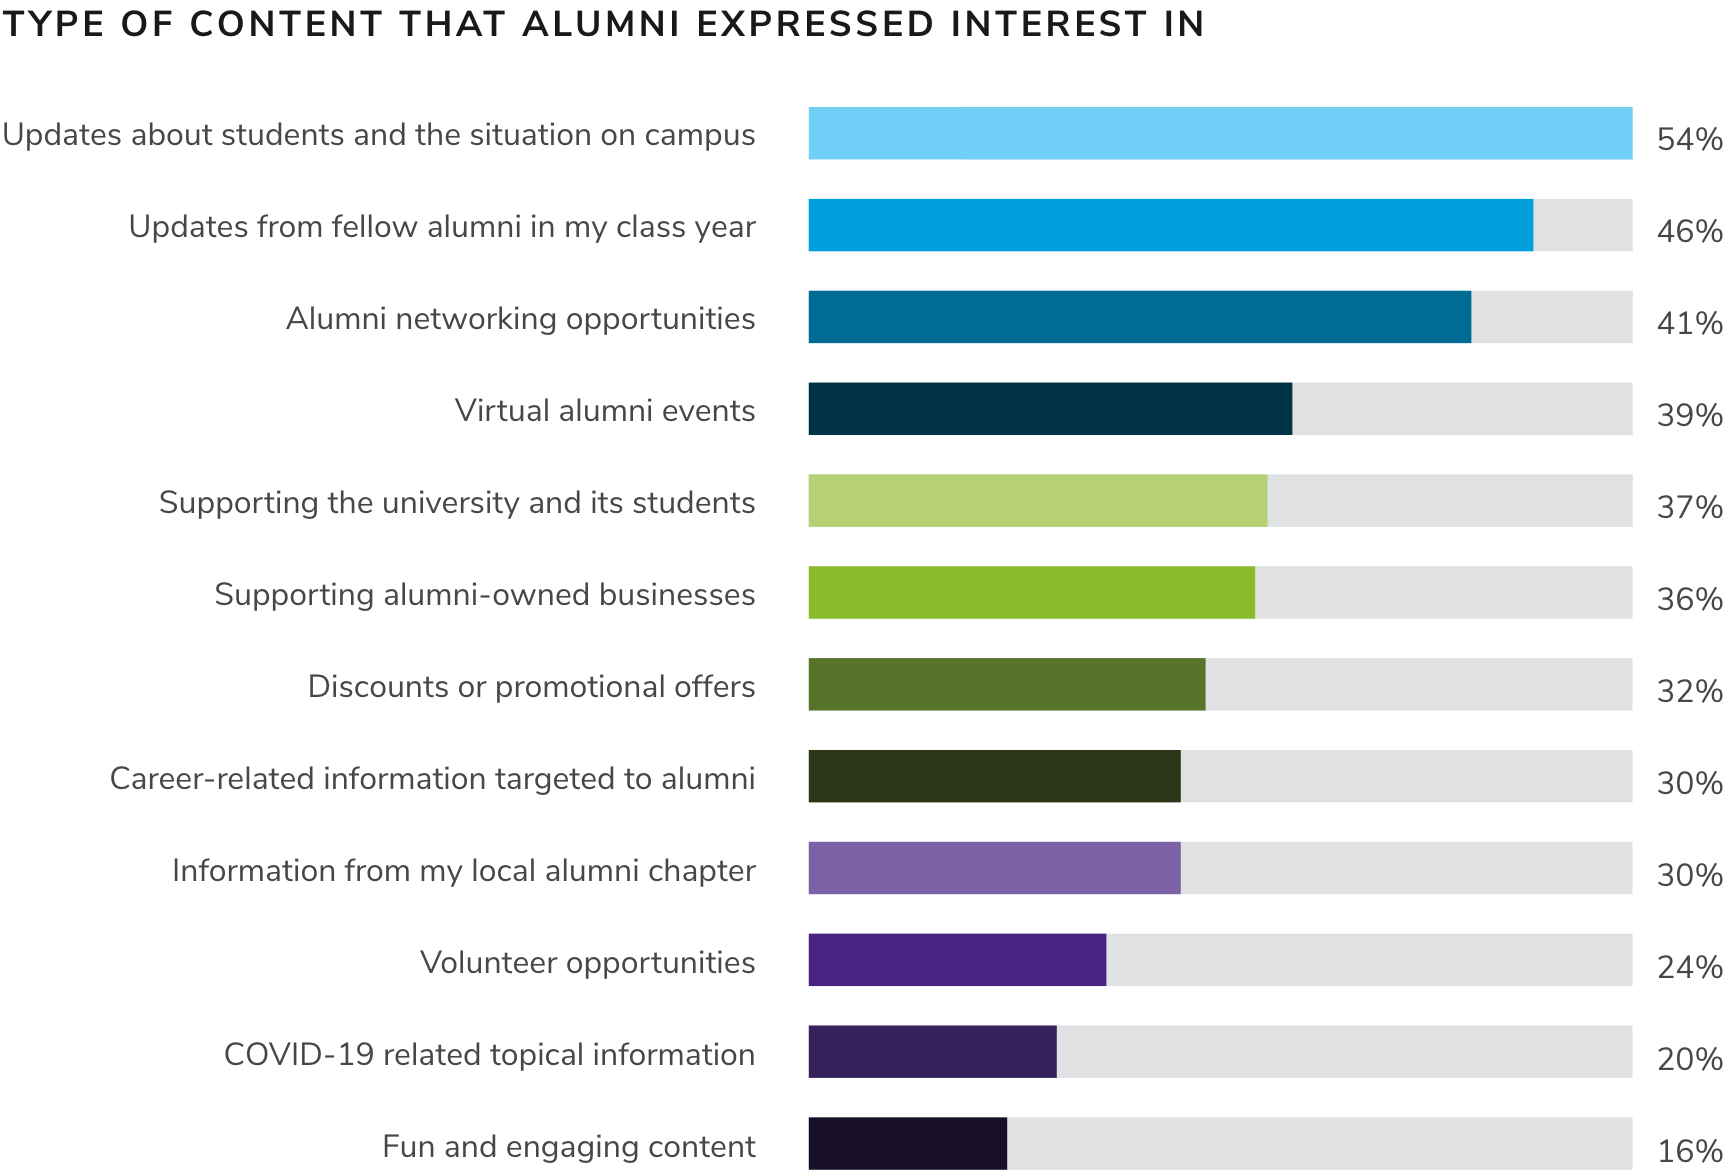 Chart of responses showing the type of content that alumni expressed interest in